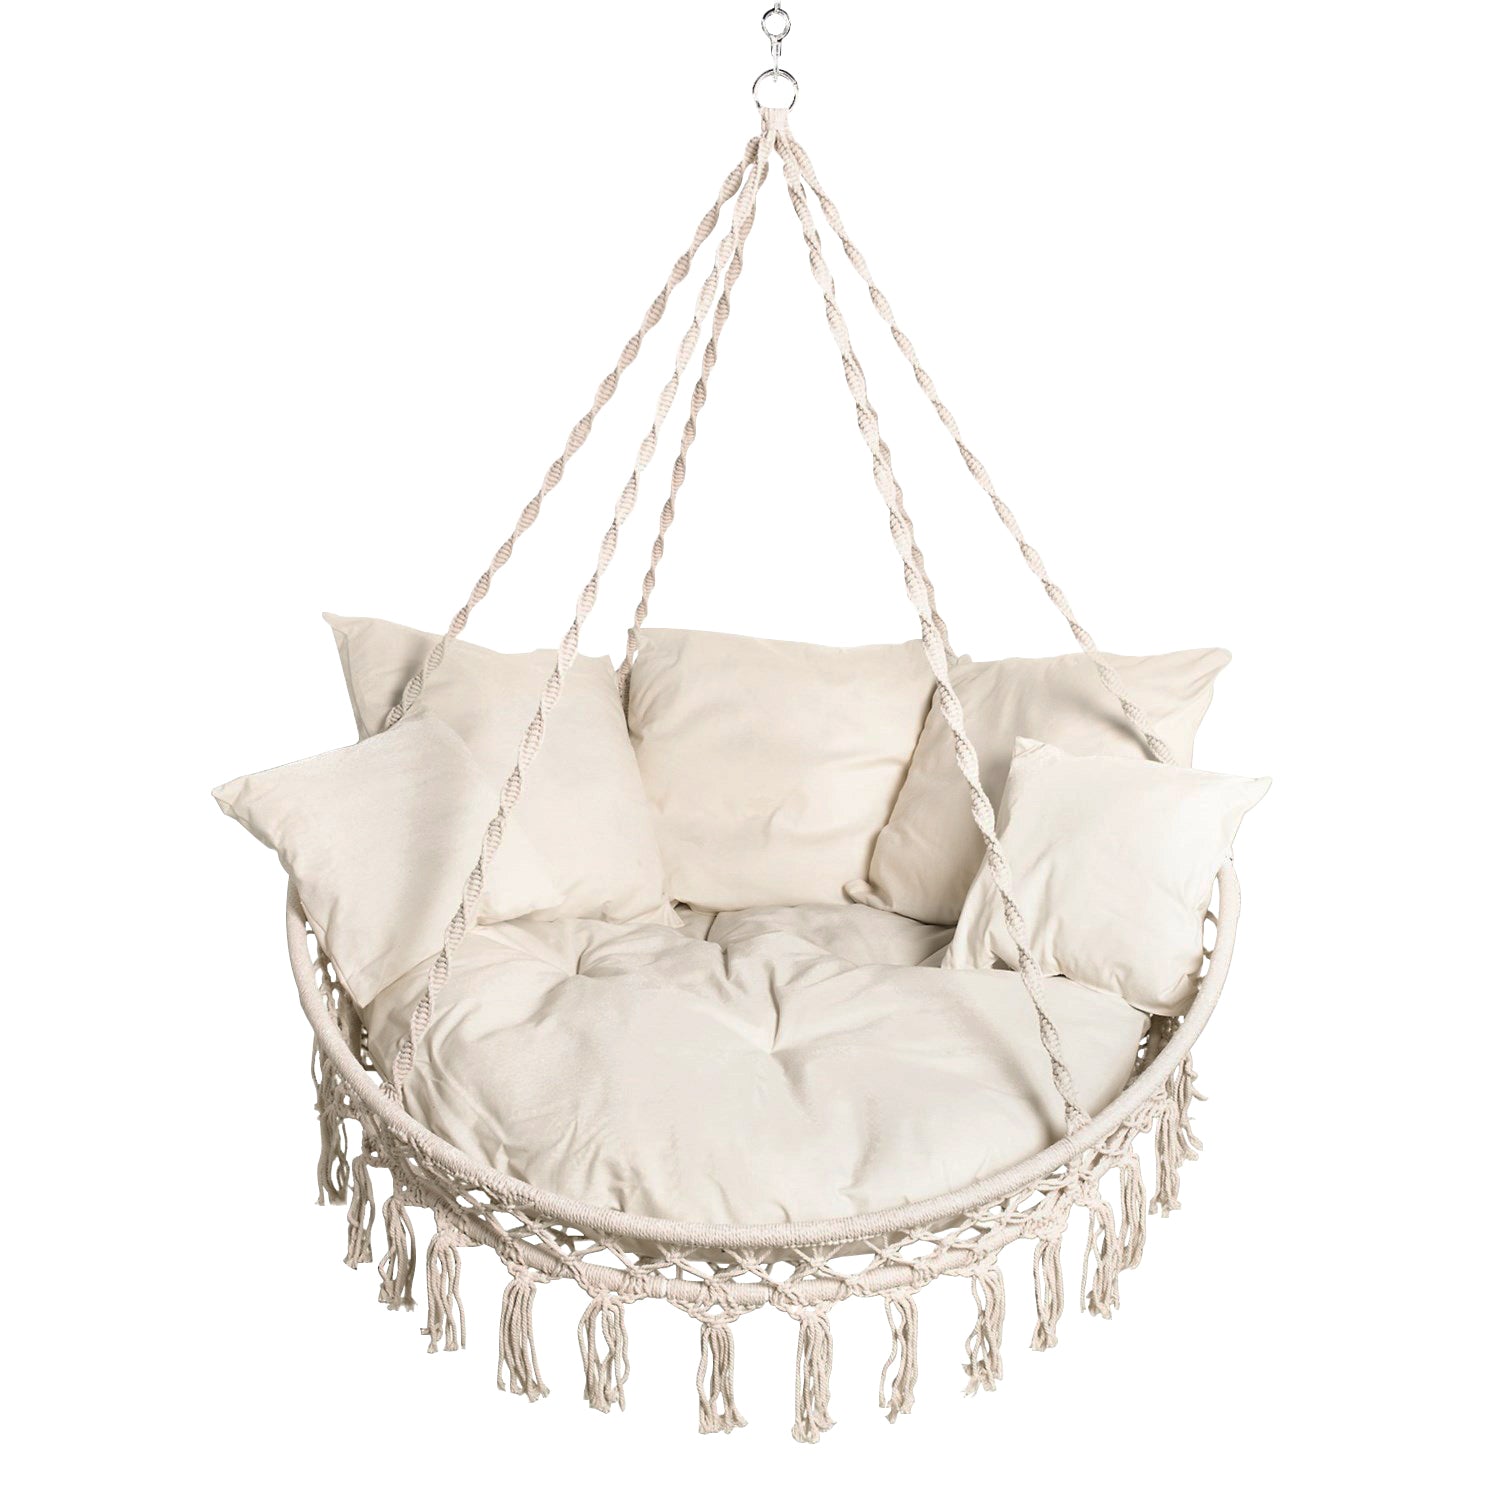 Bohemian Style 2-Person Macramé Swing Chair w/ Pillows & Hanging Hardware | 55-in. Wide | 500 Lb. Capacity